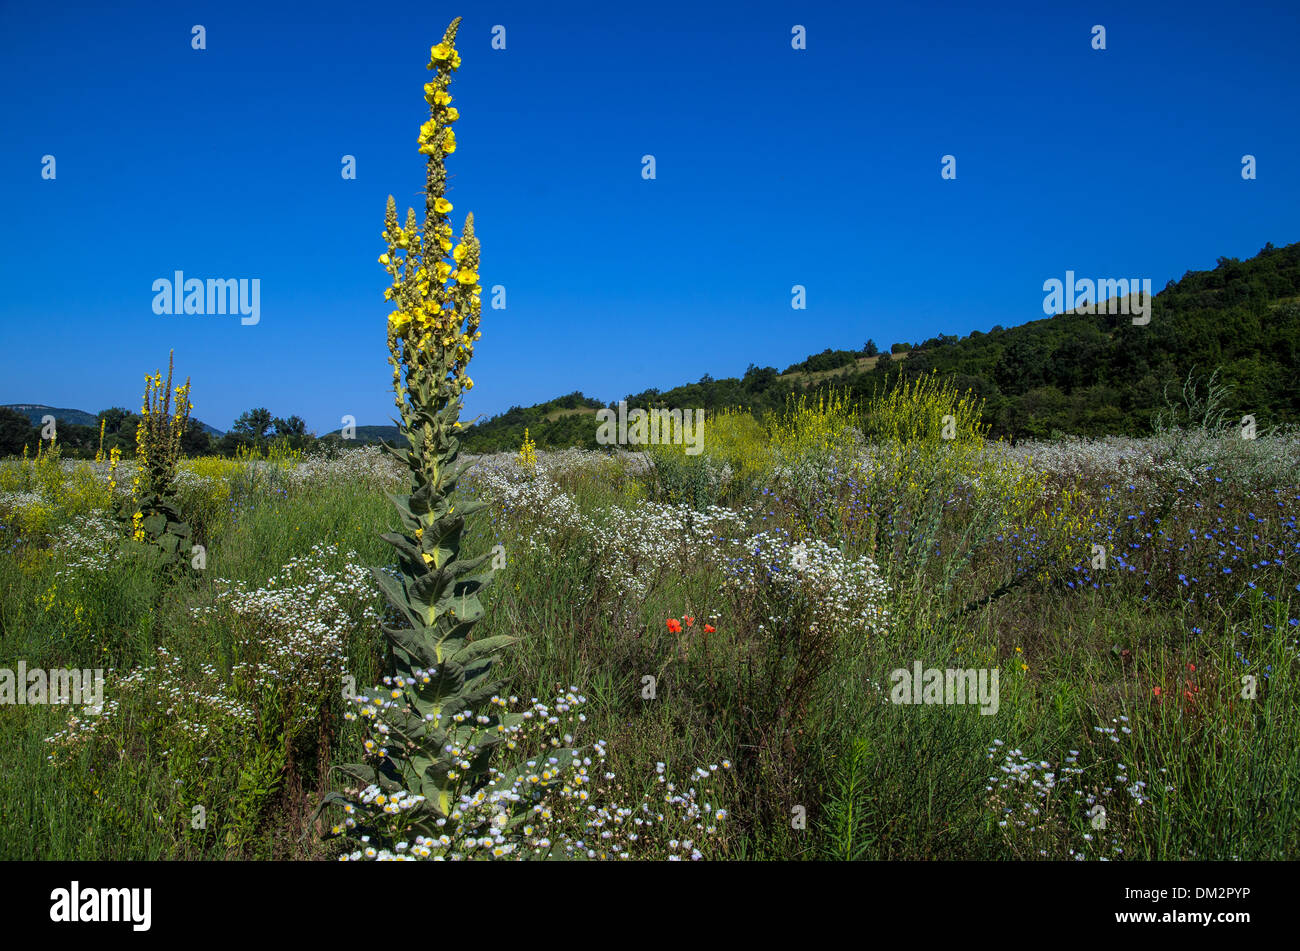 Mullein, royal candle, sheep tail - Herbs Stock Photo